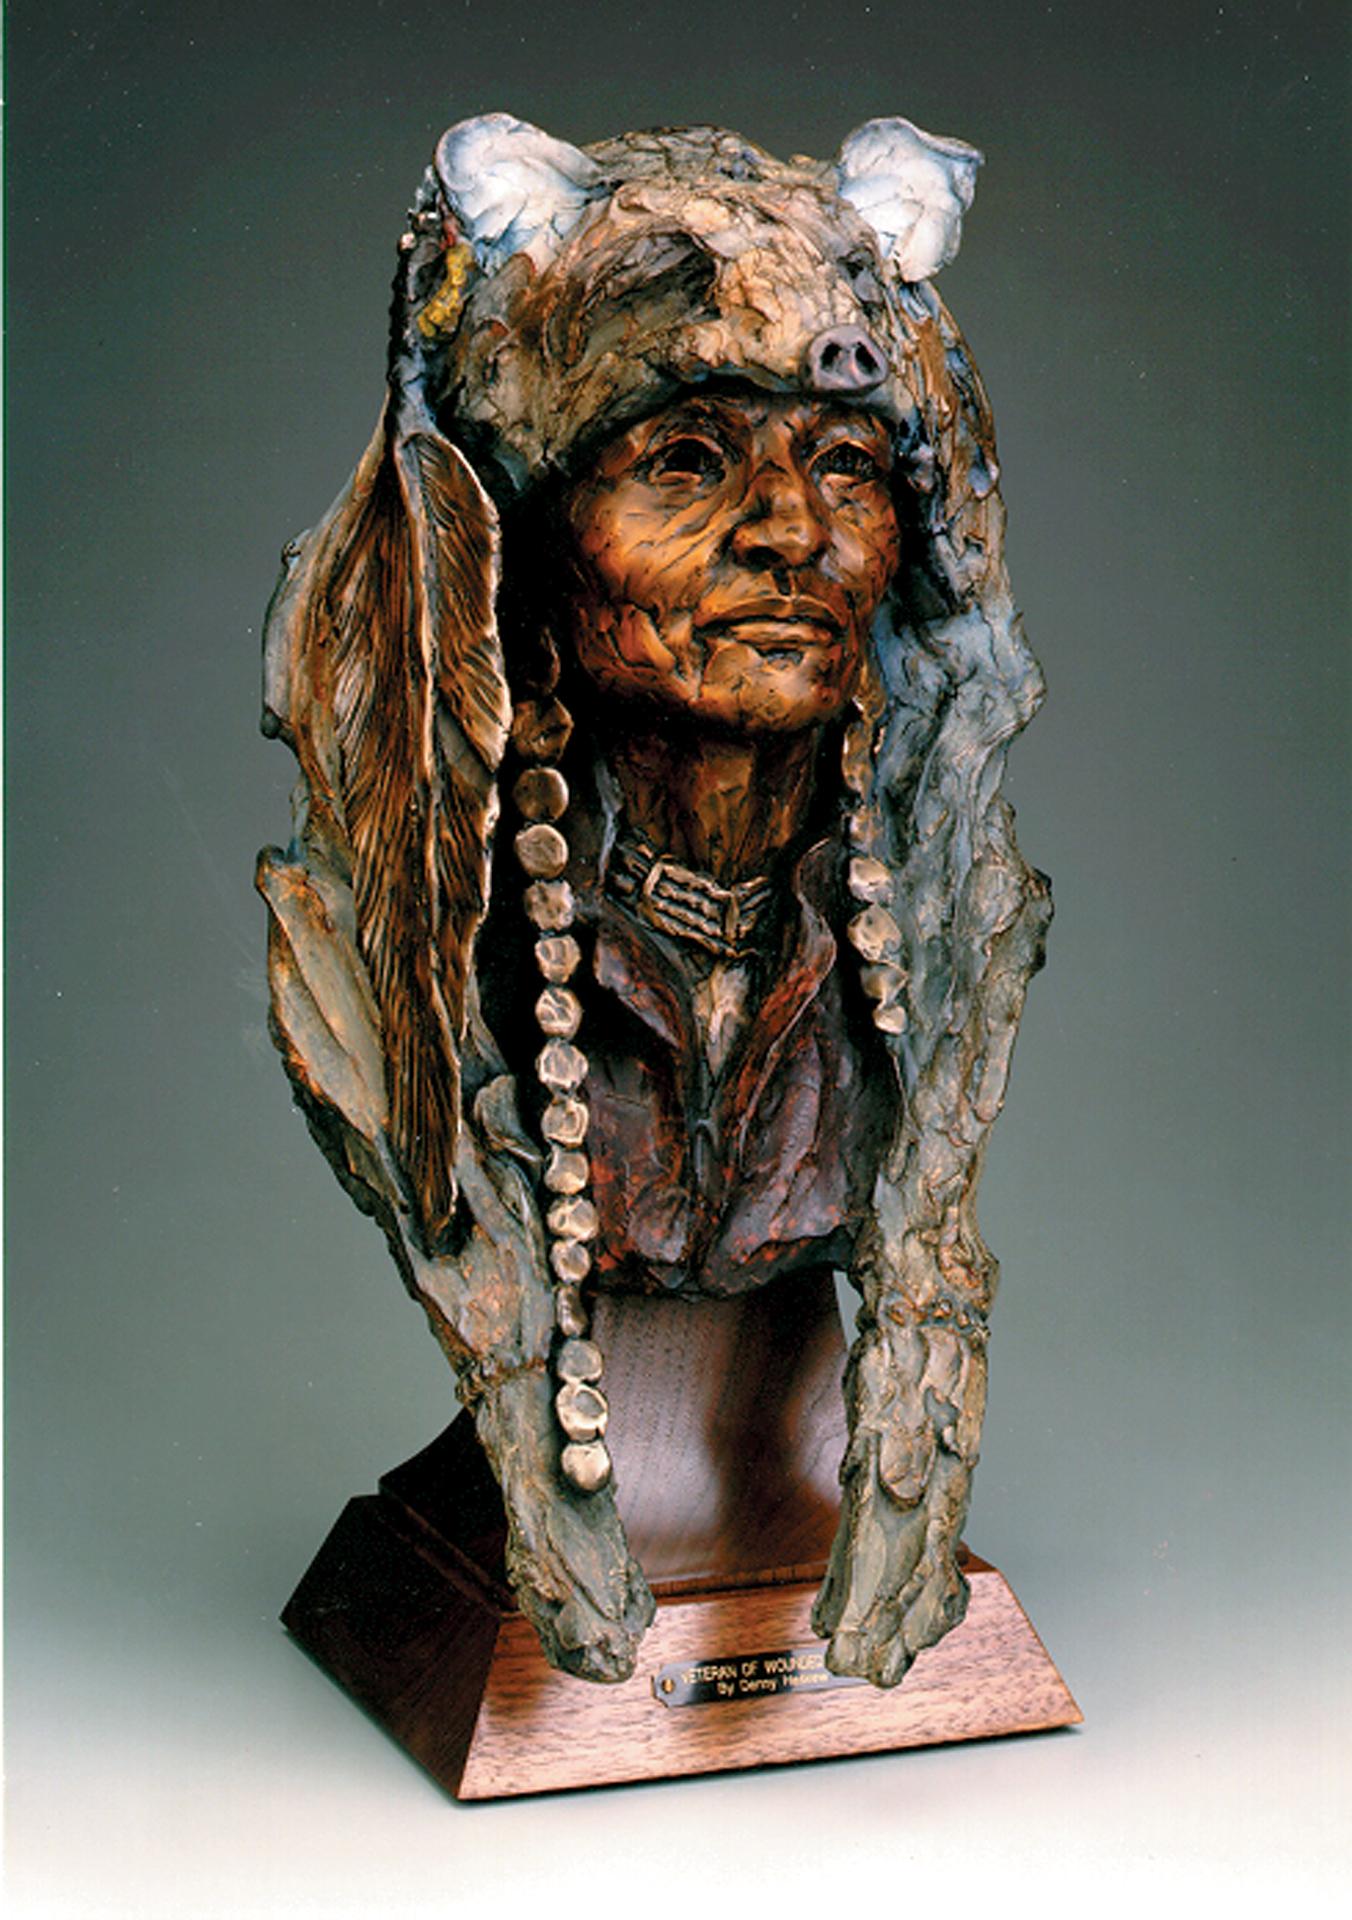 "Veteran of Wounded Knee" by Denny Haskew 
Figurative Bronze Bust of a Native American
10.5x23.5x19" Ed/20

"Proud Man look this way
coyote sittin on your head,
good for foolin the soldiers.
Proud Man ya got scars,
bet yur face seen a gun butt 
Hey,